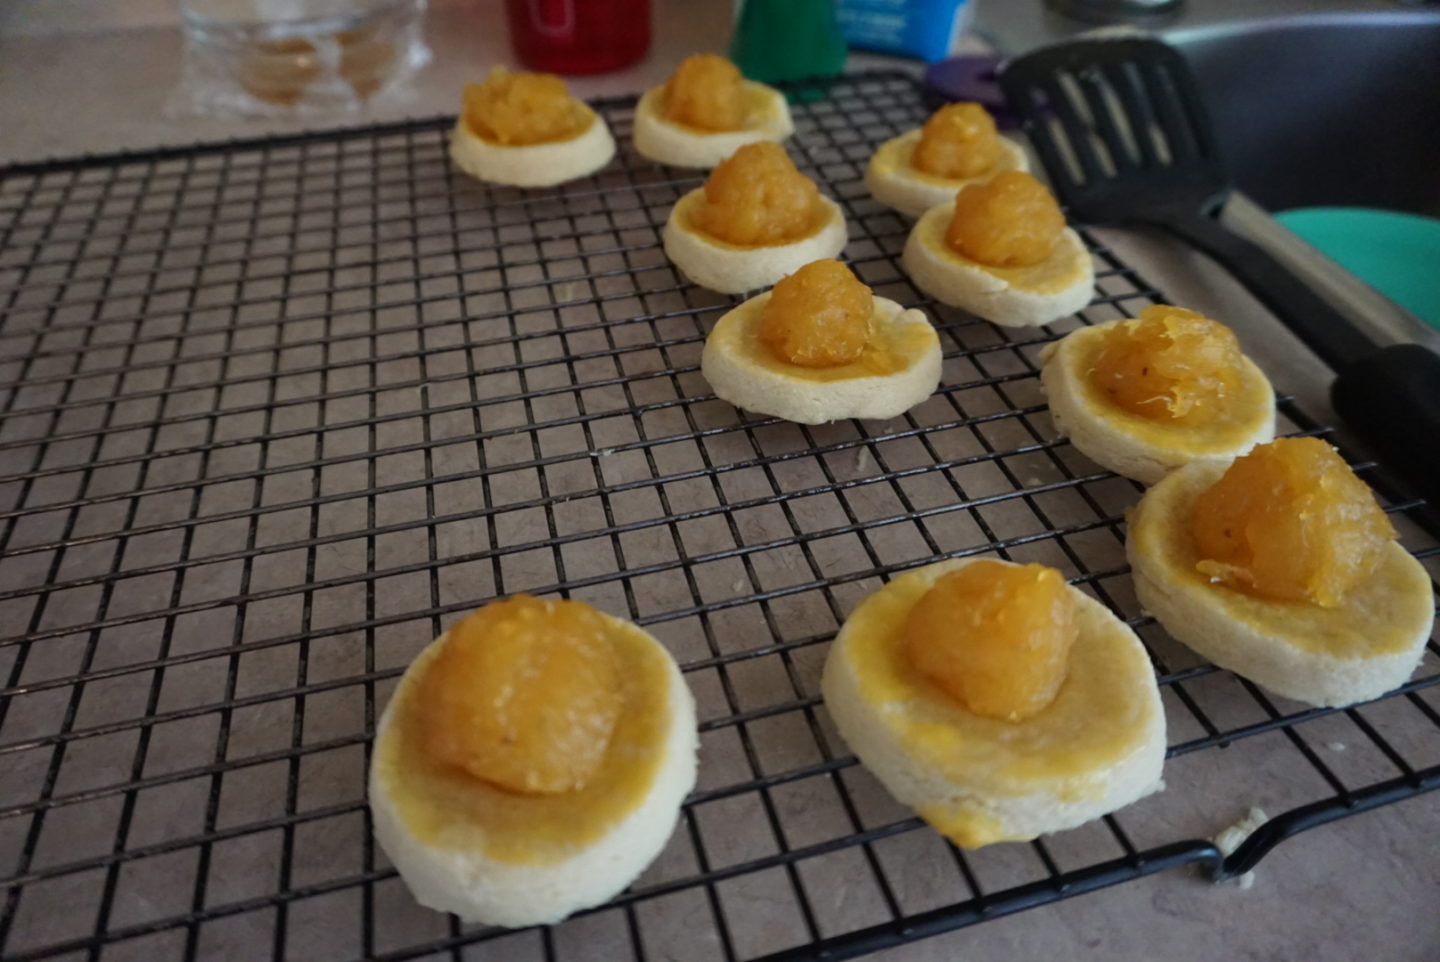 Pineapple Tarts (Inspired by Crazy Rich Asians)